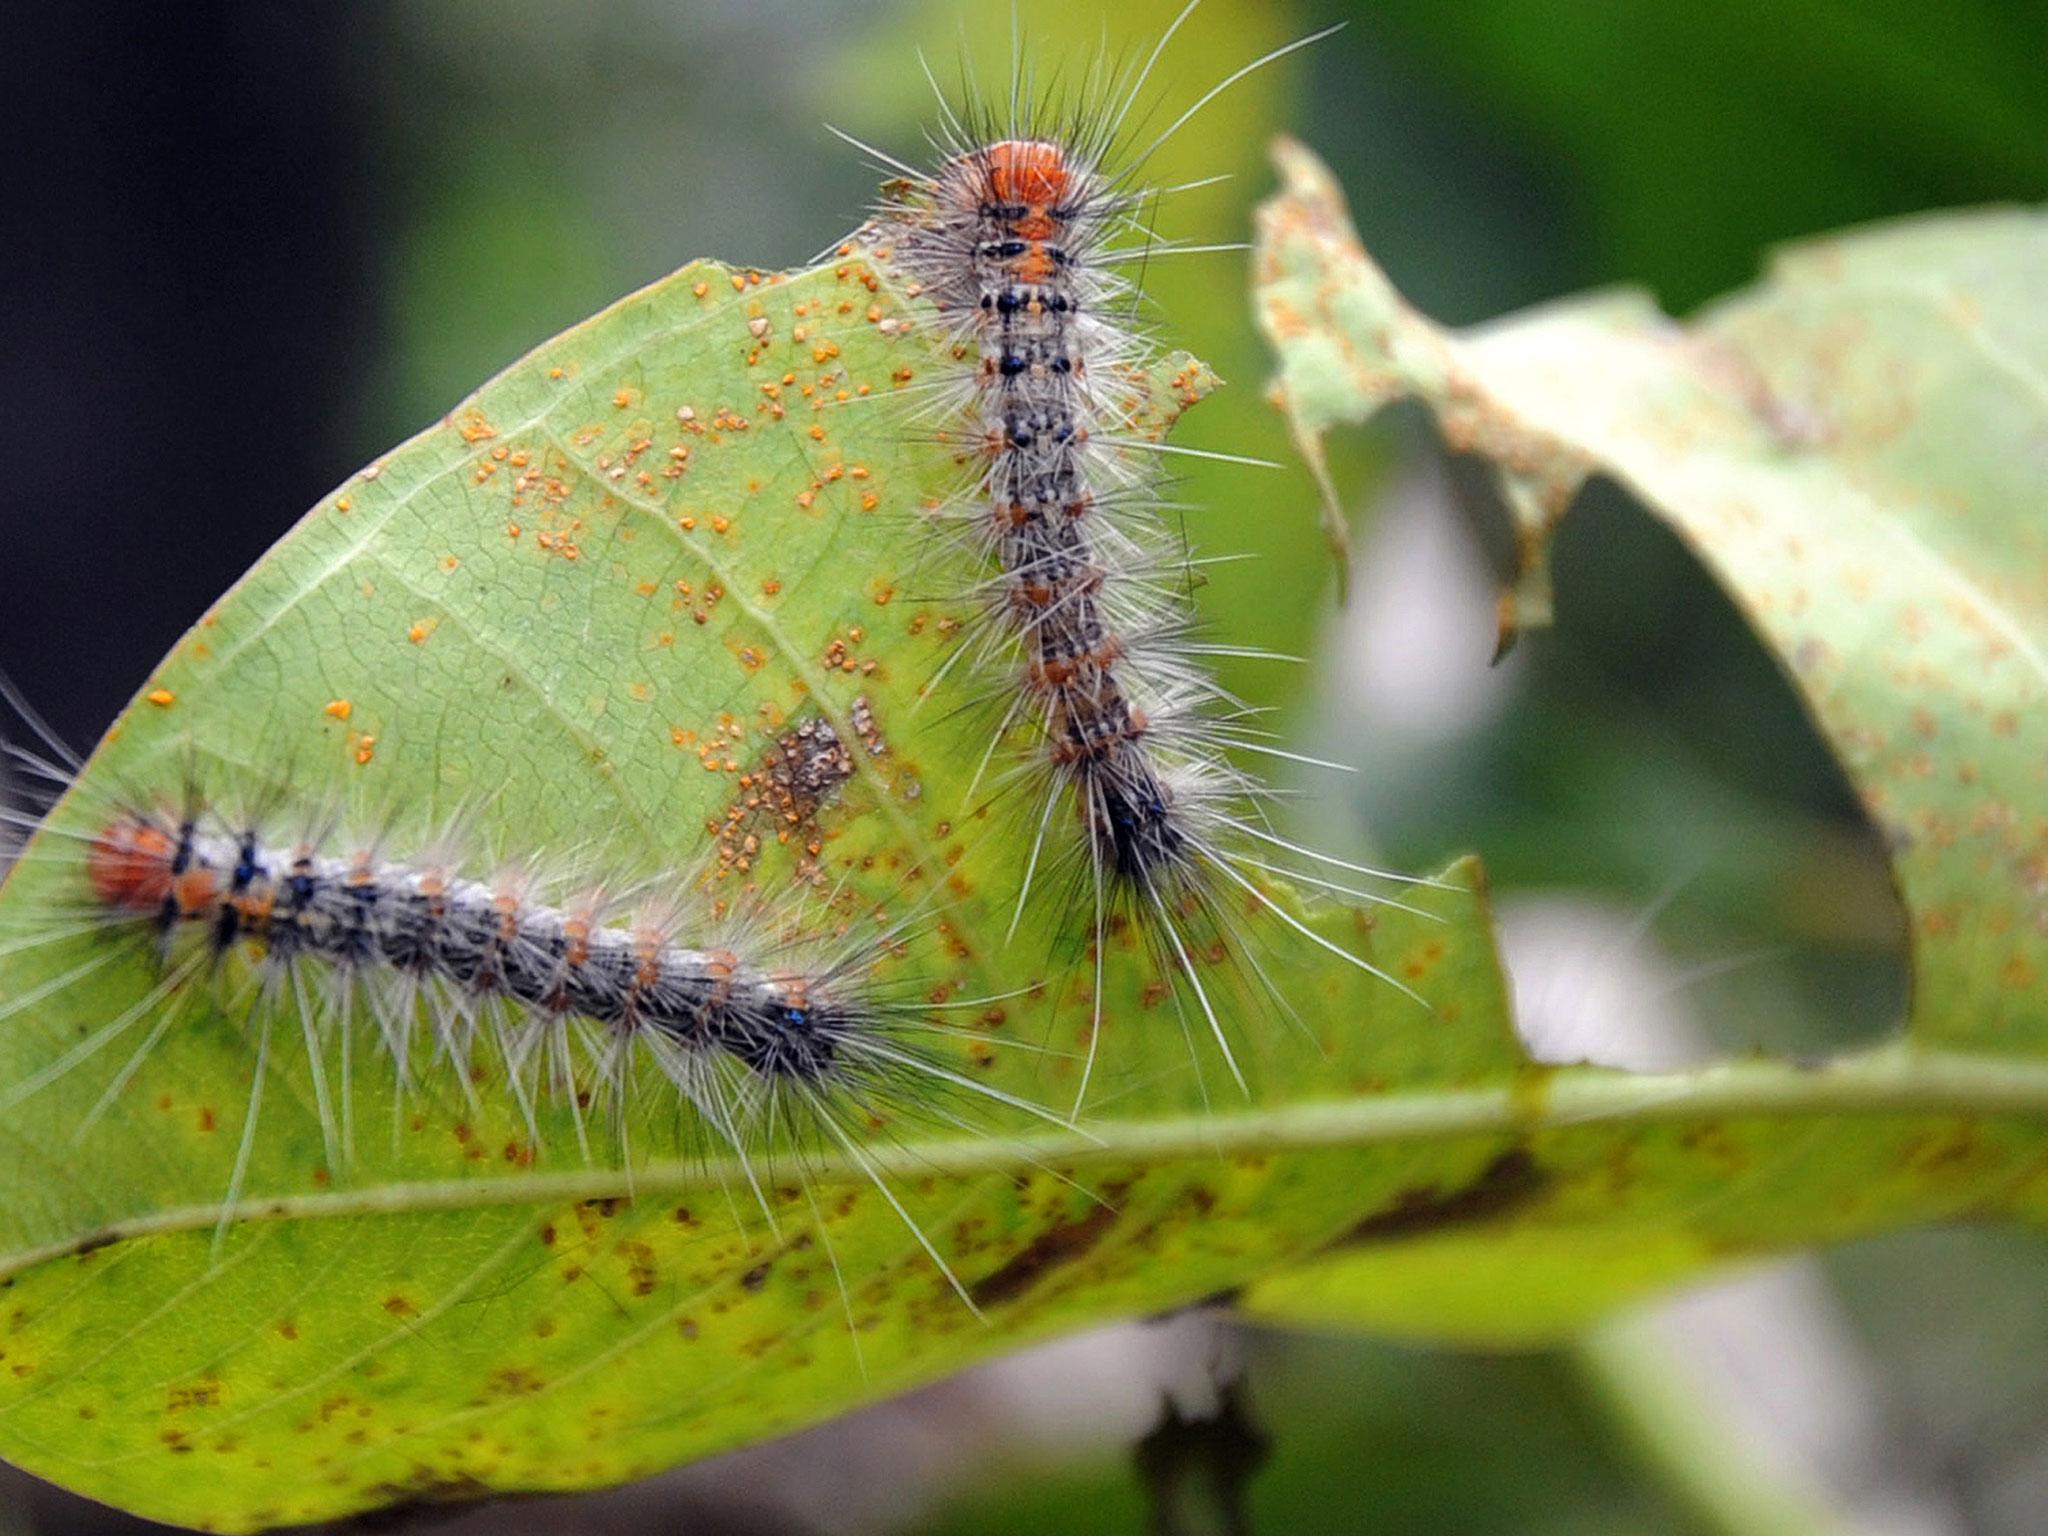 New 'zombie virus' sending caterpillars on a death march | The ...